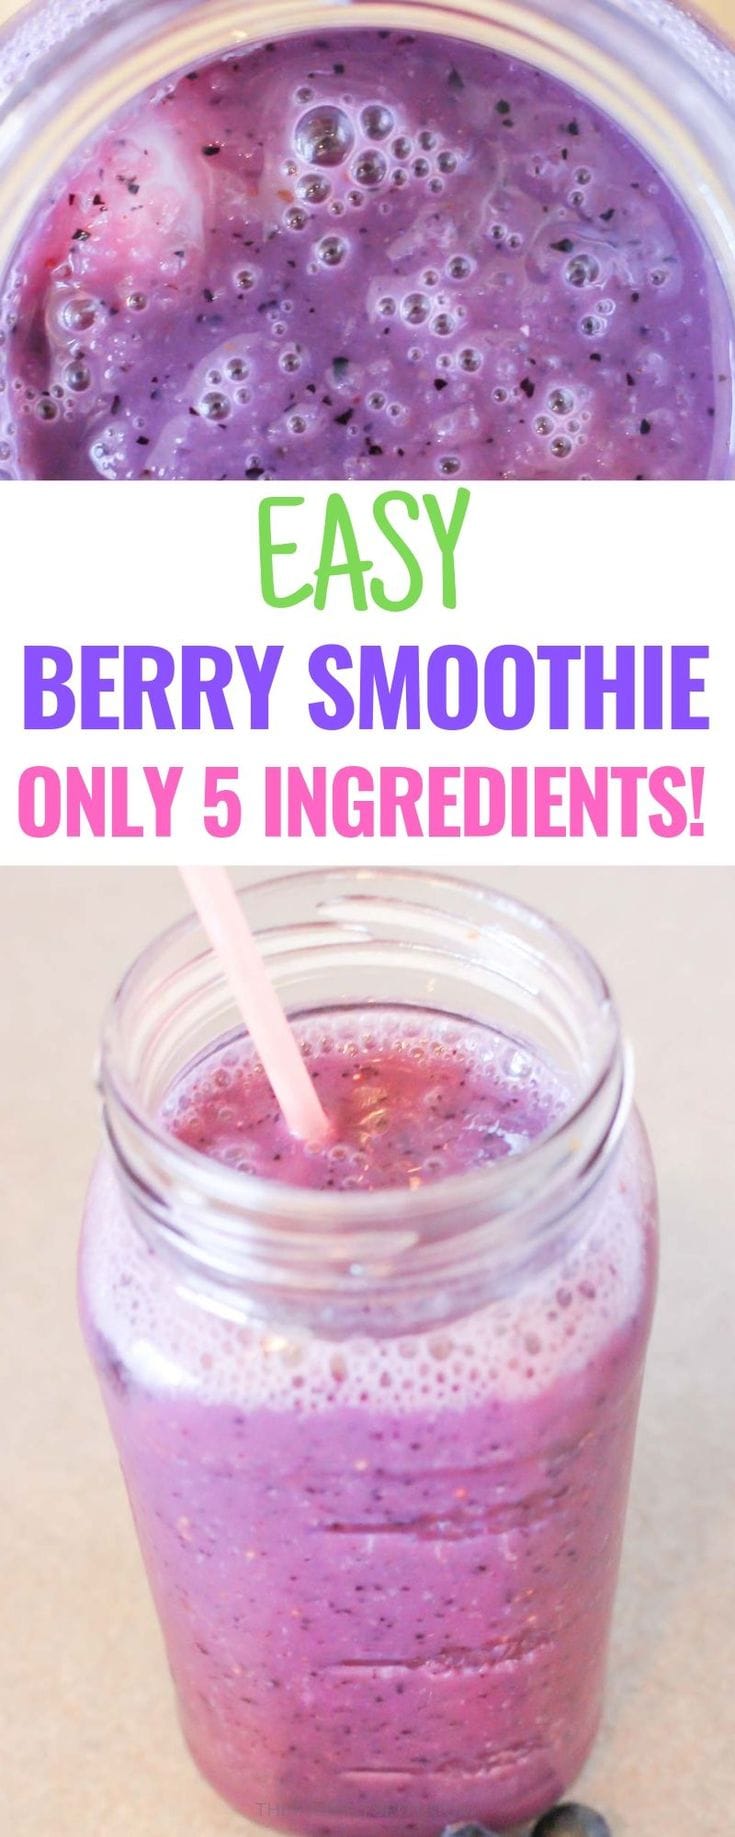 easy 5 ingredient mixed berry almond milk smoothie no yogurt healthy treat with healthy banana, strawberry and blueberry 